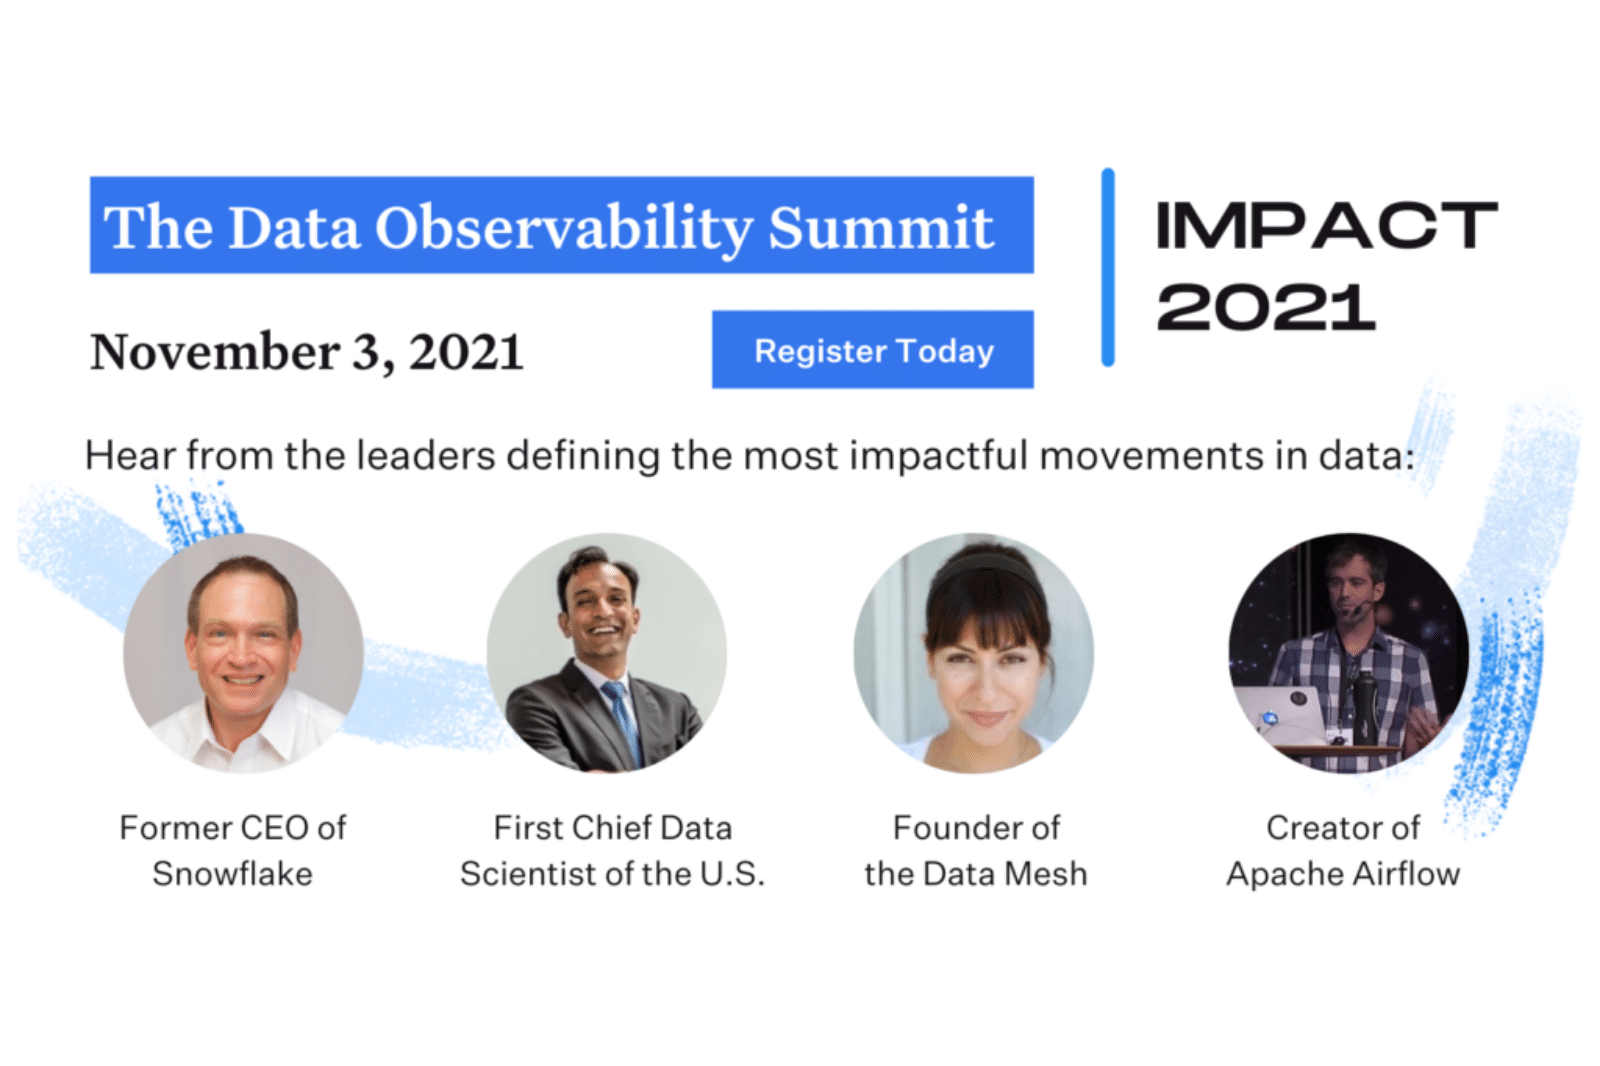 Unicorns, data mesh, category creation, and more reasons to attend IMPACT: The Data Observability Summit